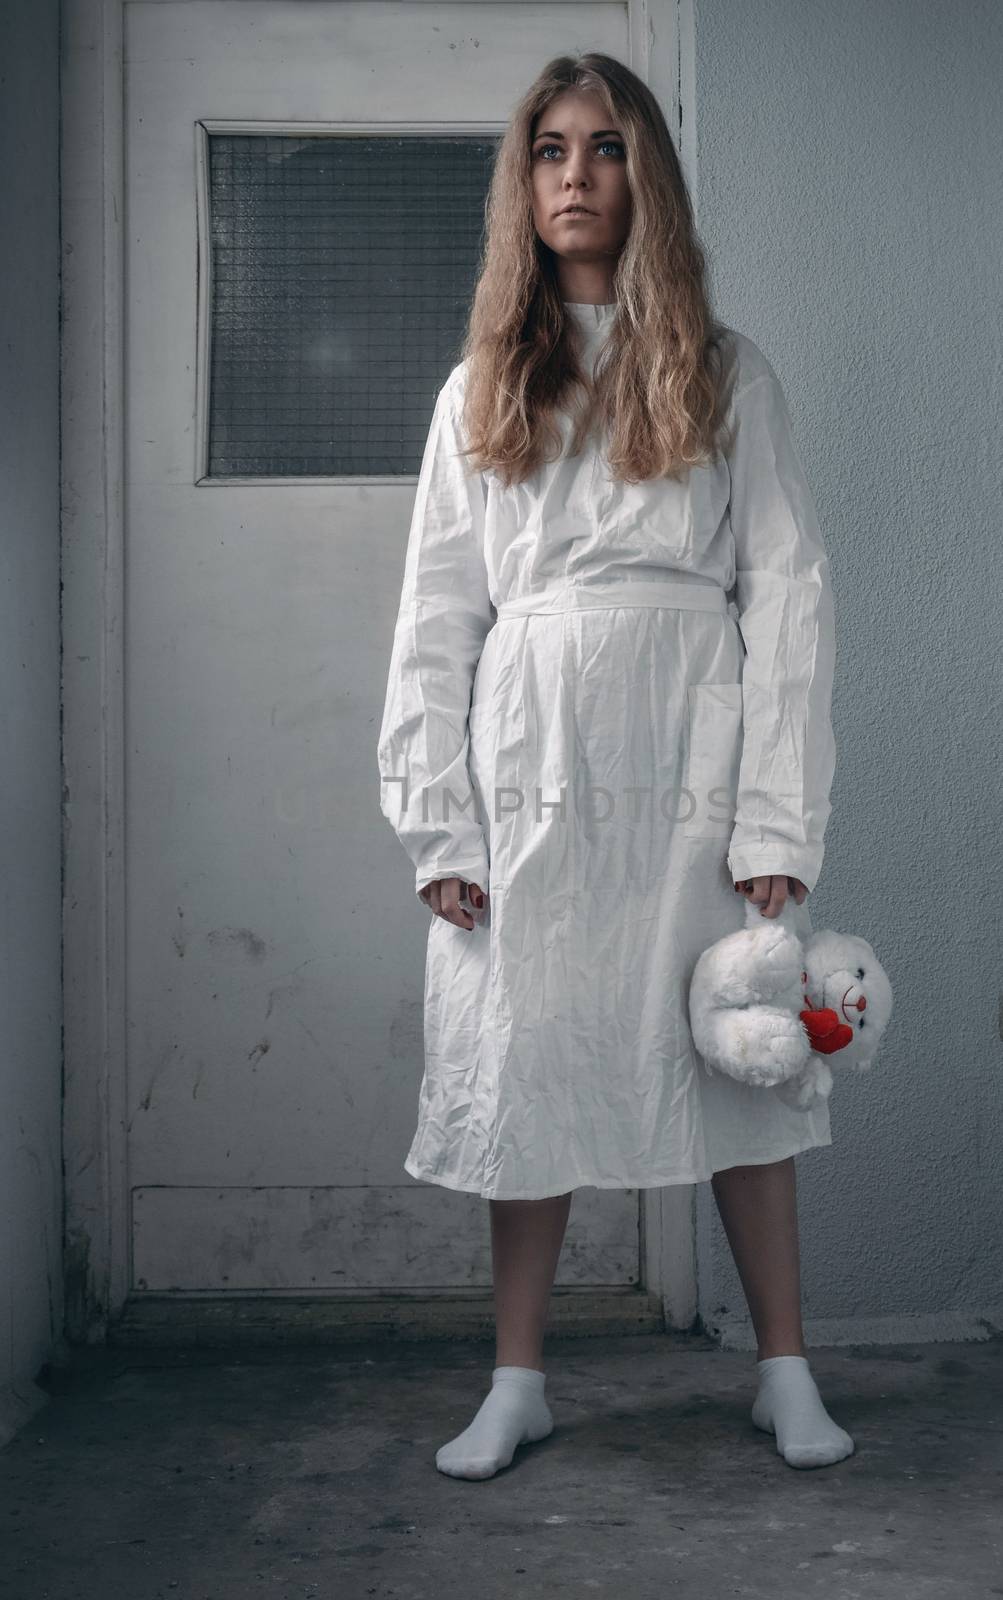 mentally ill girlwith a straitjacket in a Psychiatric